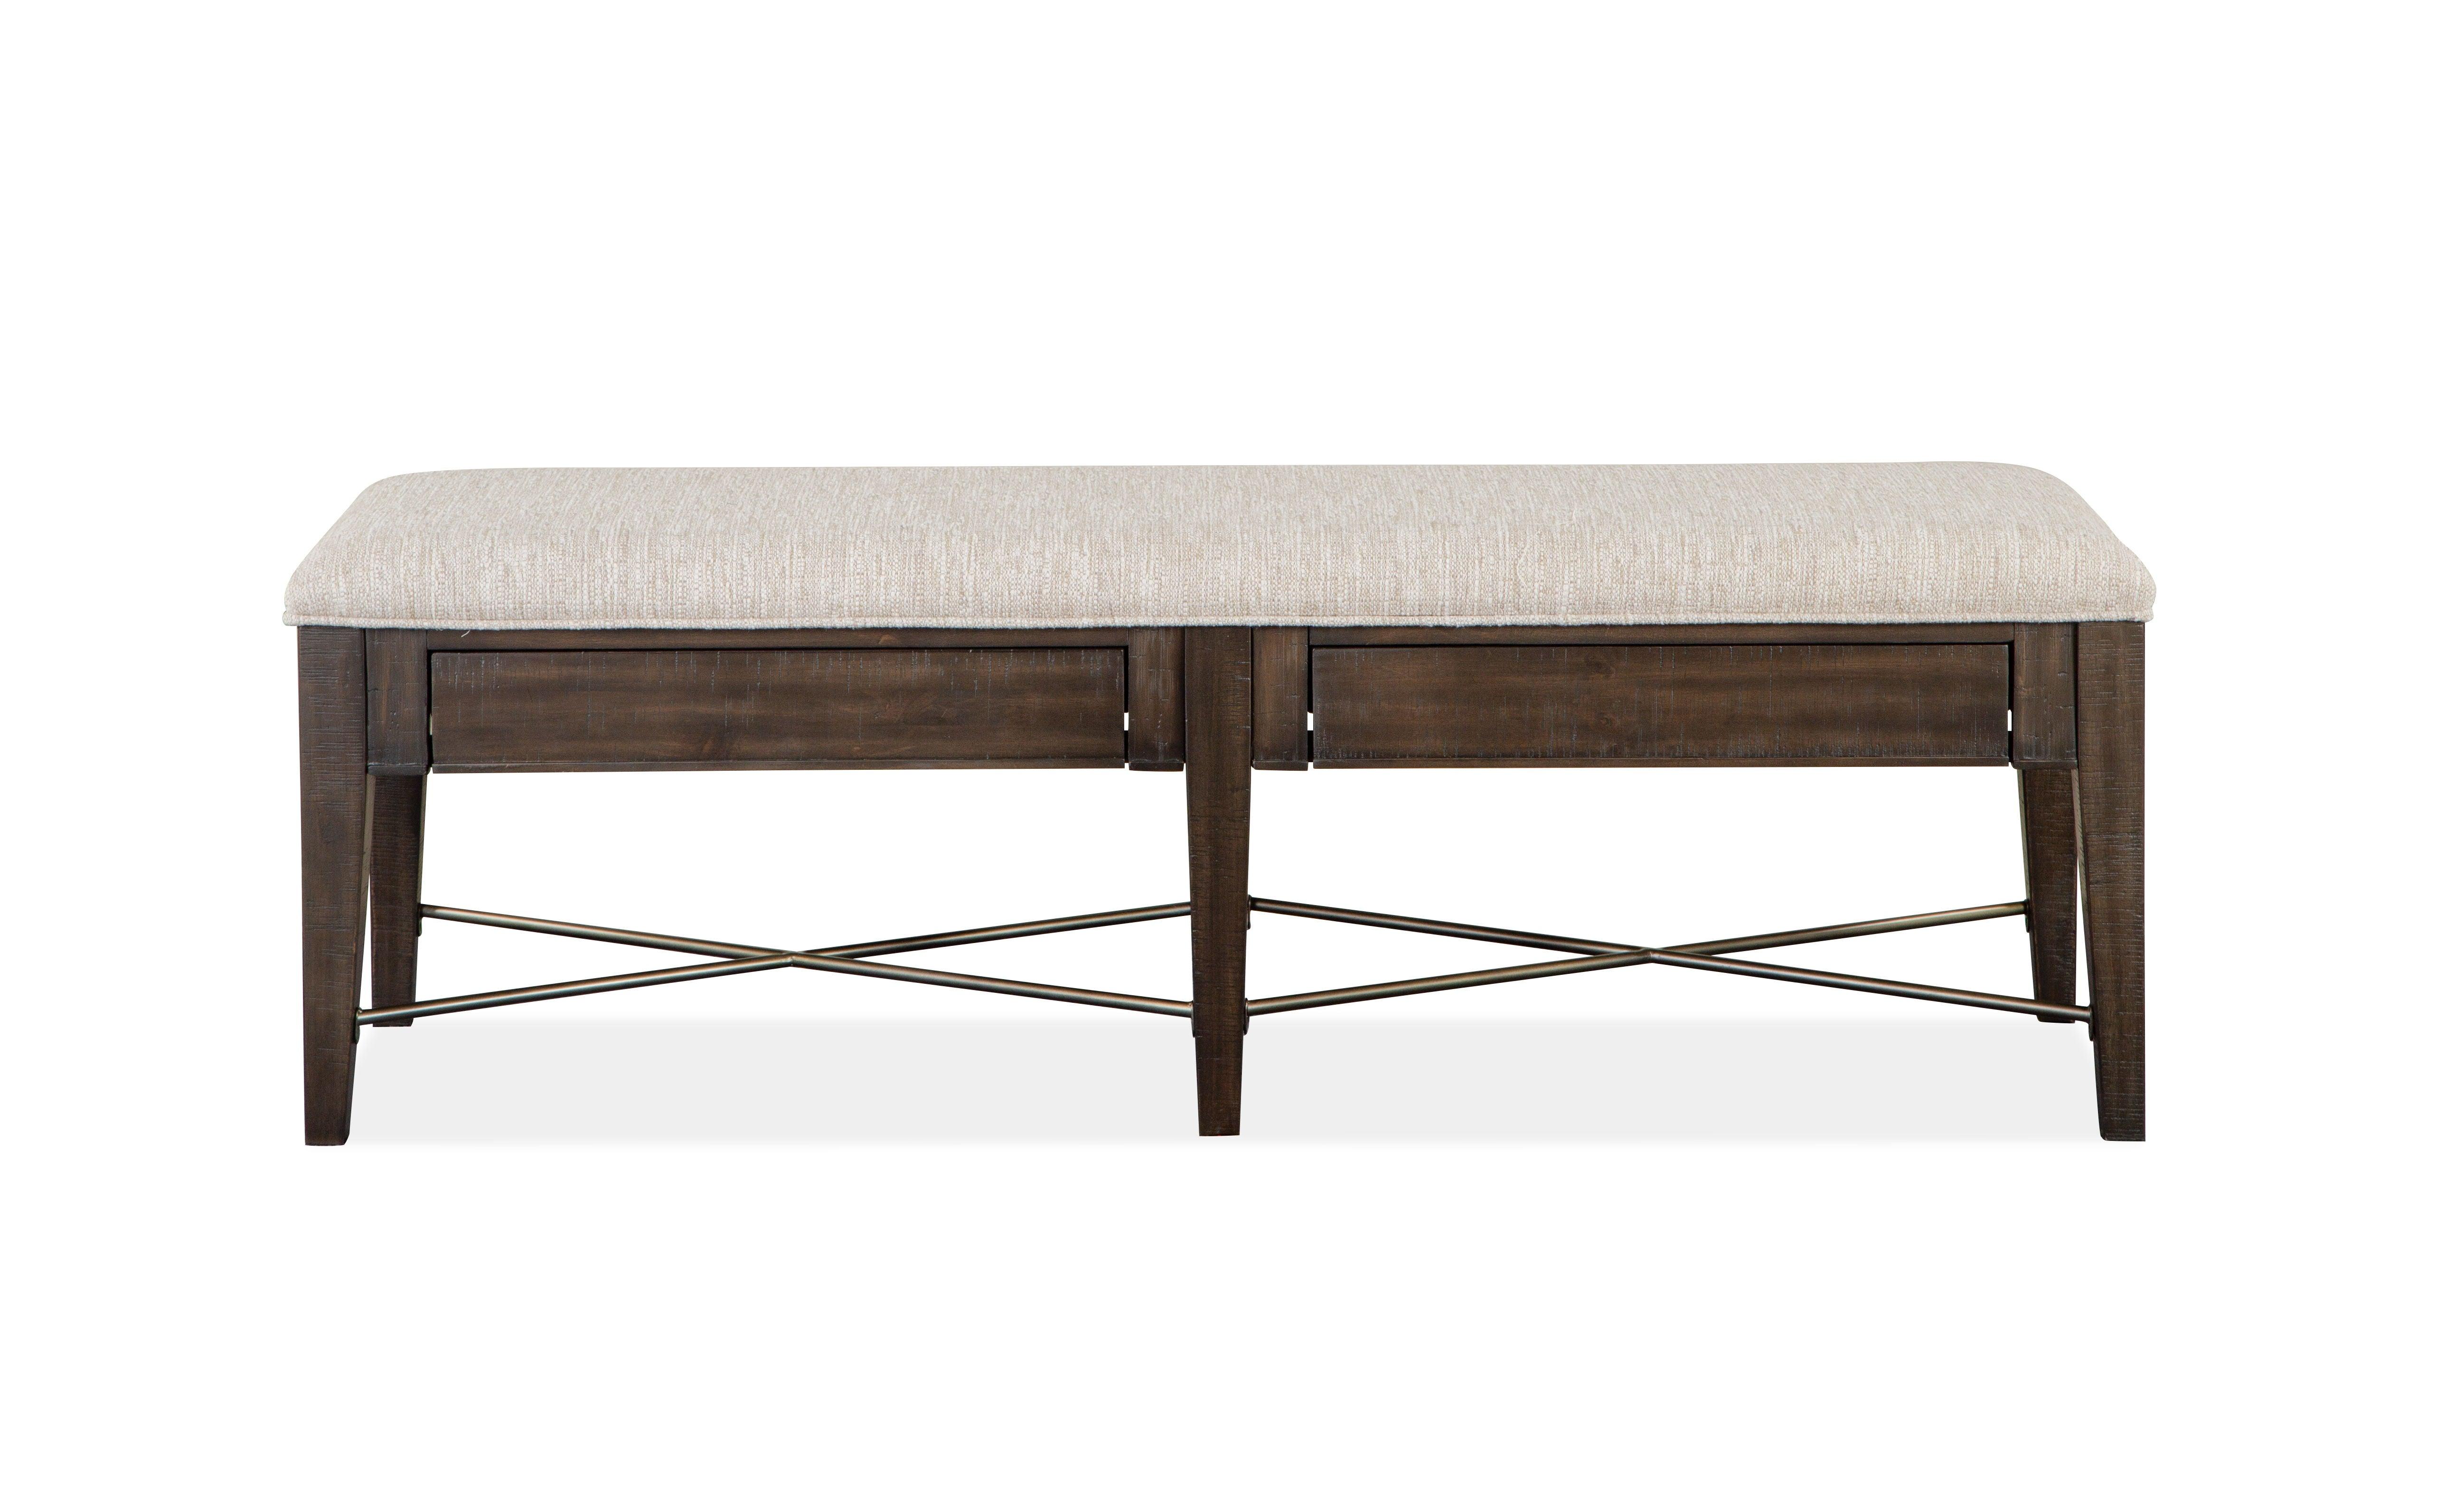 Magnussen Furniture - Westley Falls - Bench With Upholstered Seat - Graphite - 5th Avenue Furniture